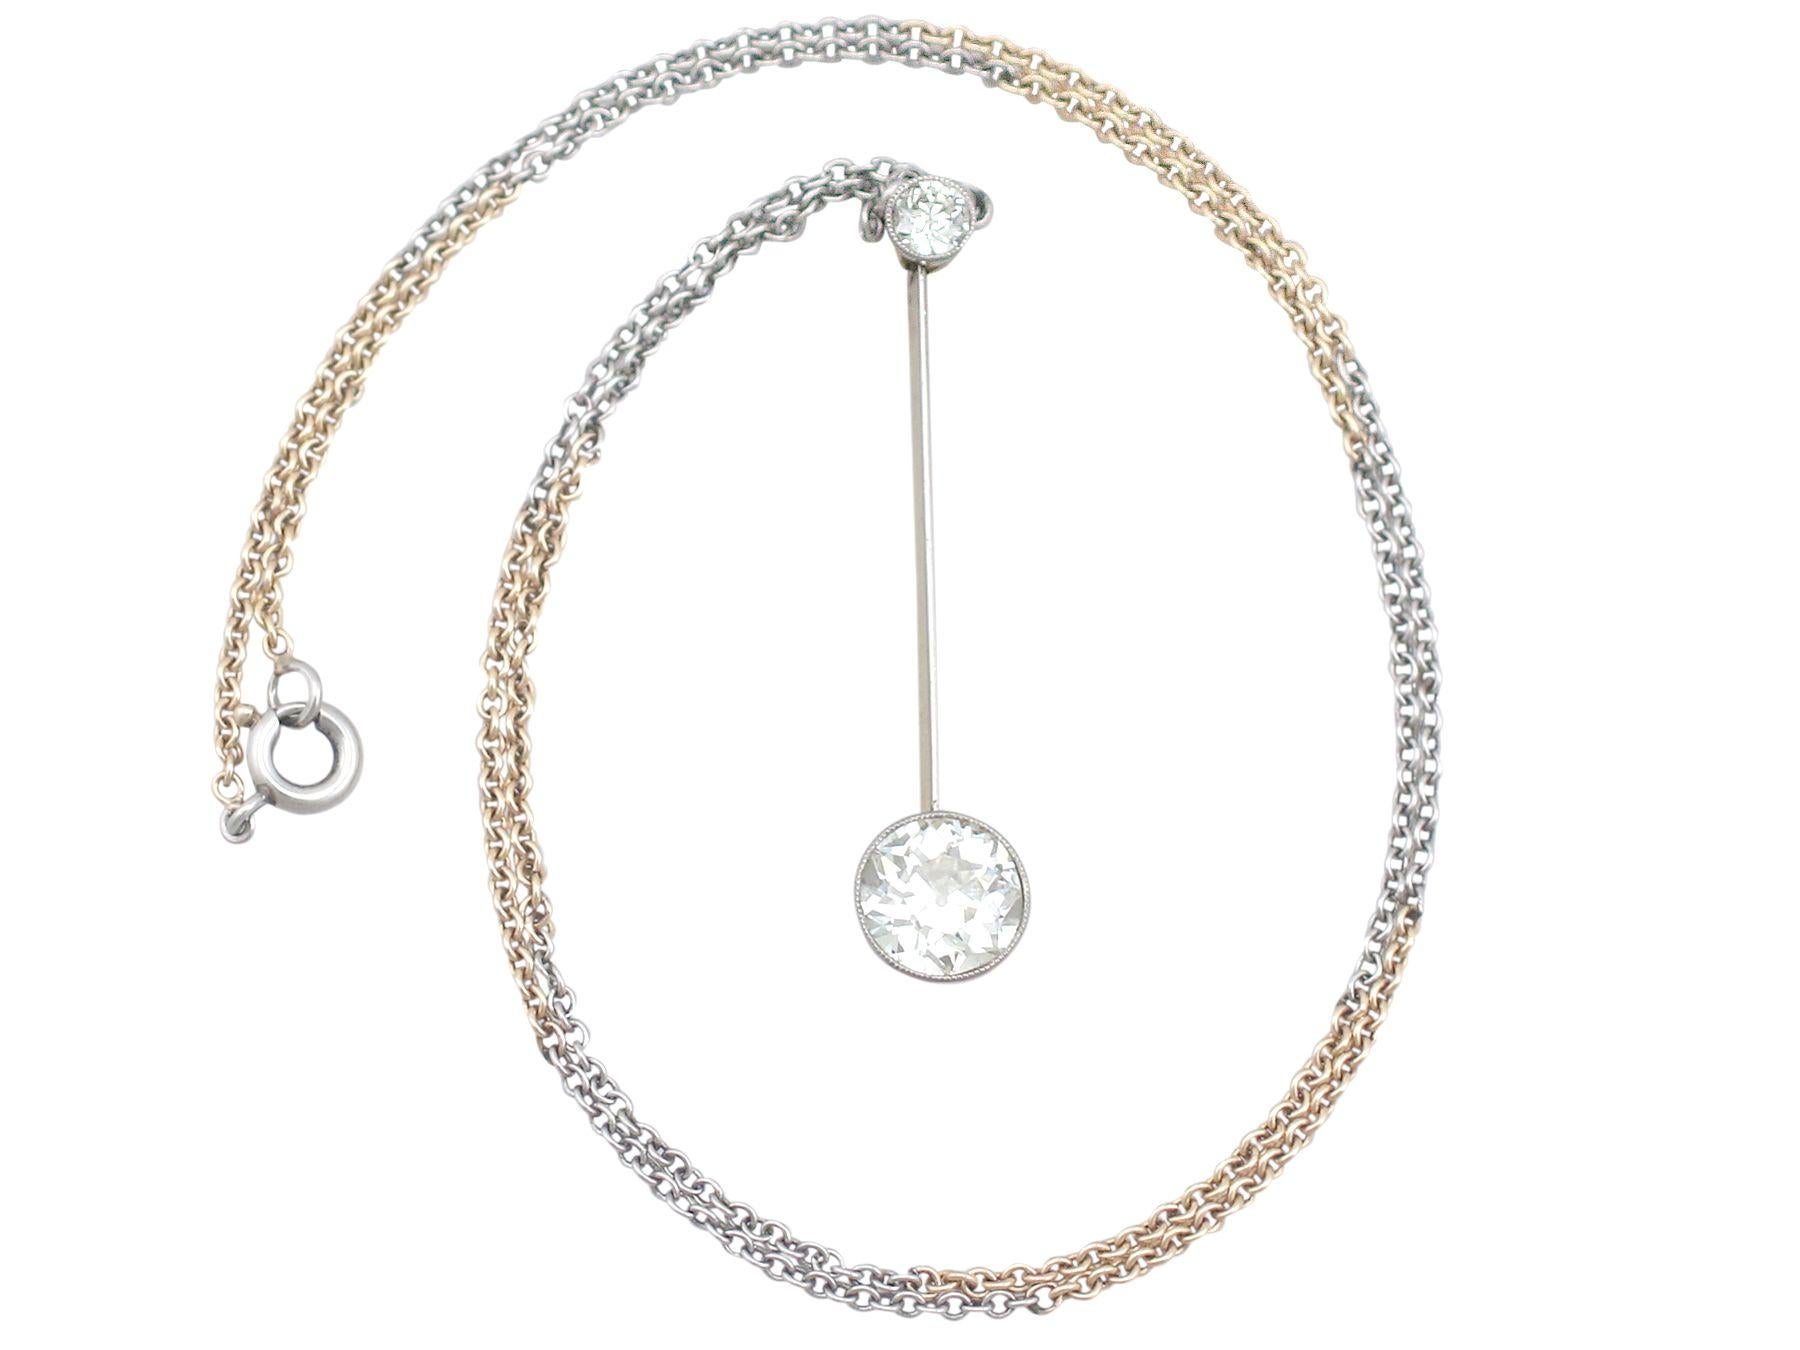 This stunning antique diamond necklace has been crafted in 15k yellow gold with a 15k white gold setting.

The necklace features a 1.42Cts old European round cut diamond individually bezel set within a millegrain decorated frame.

The feature